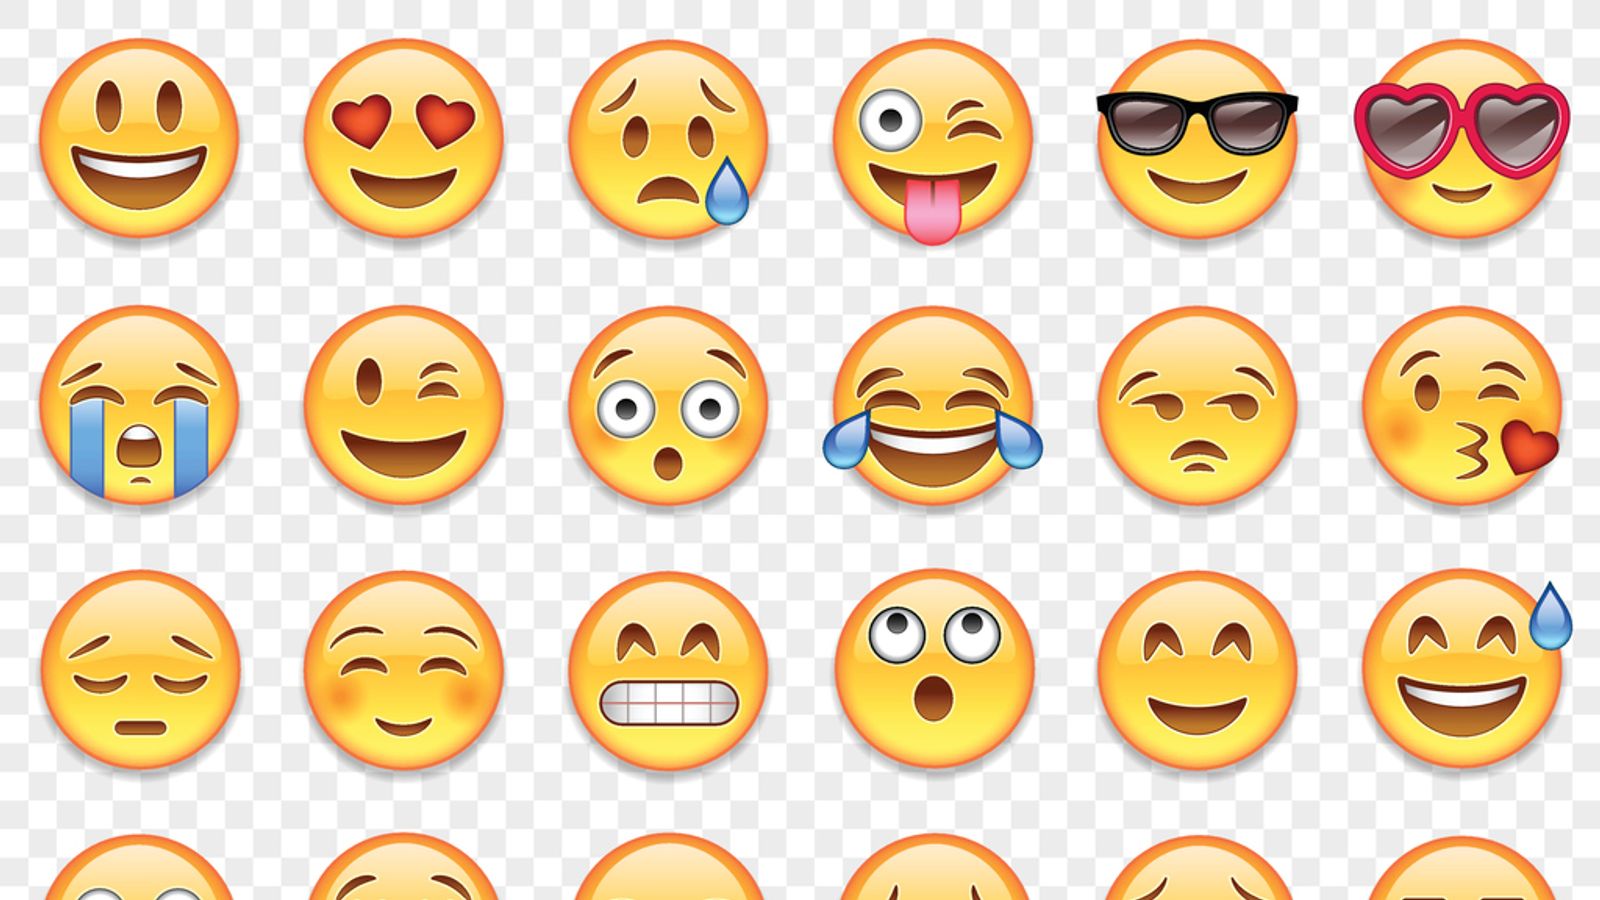 Emojicons meaning